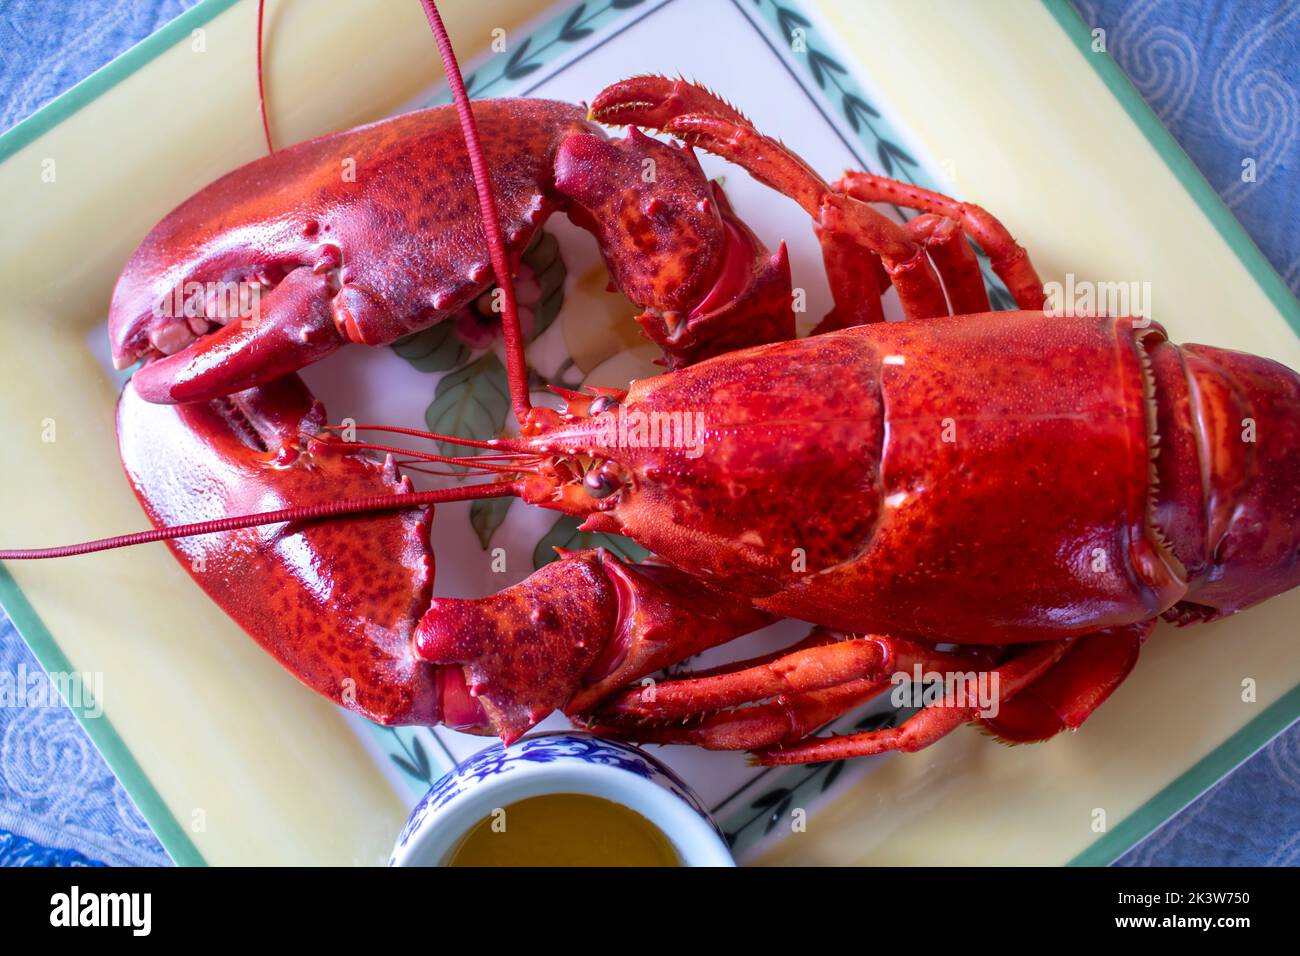 Cup of butter next to a cook fresh full lobster on a yellow plate red lobster Stock Photo